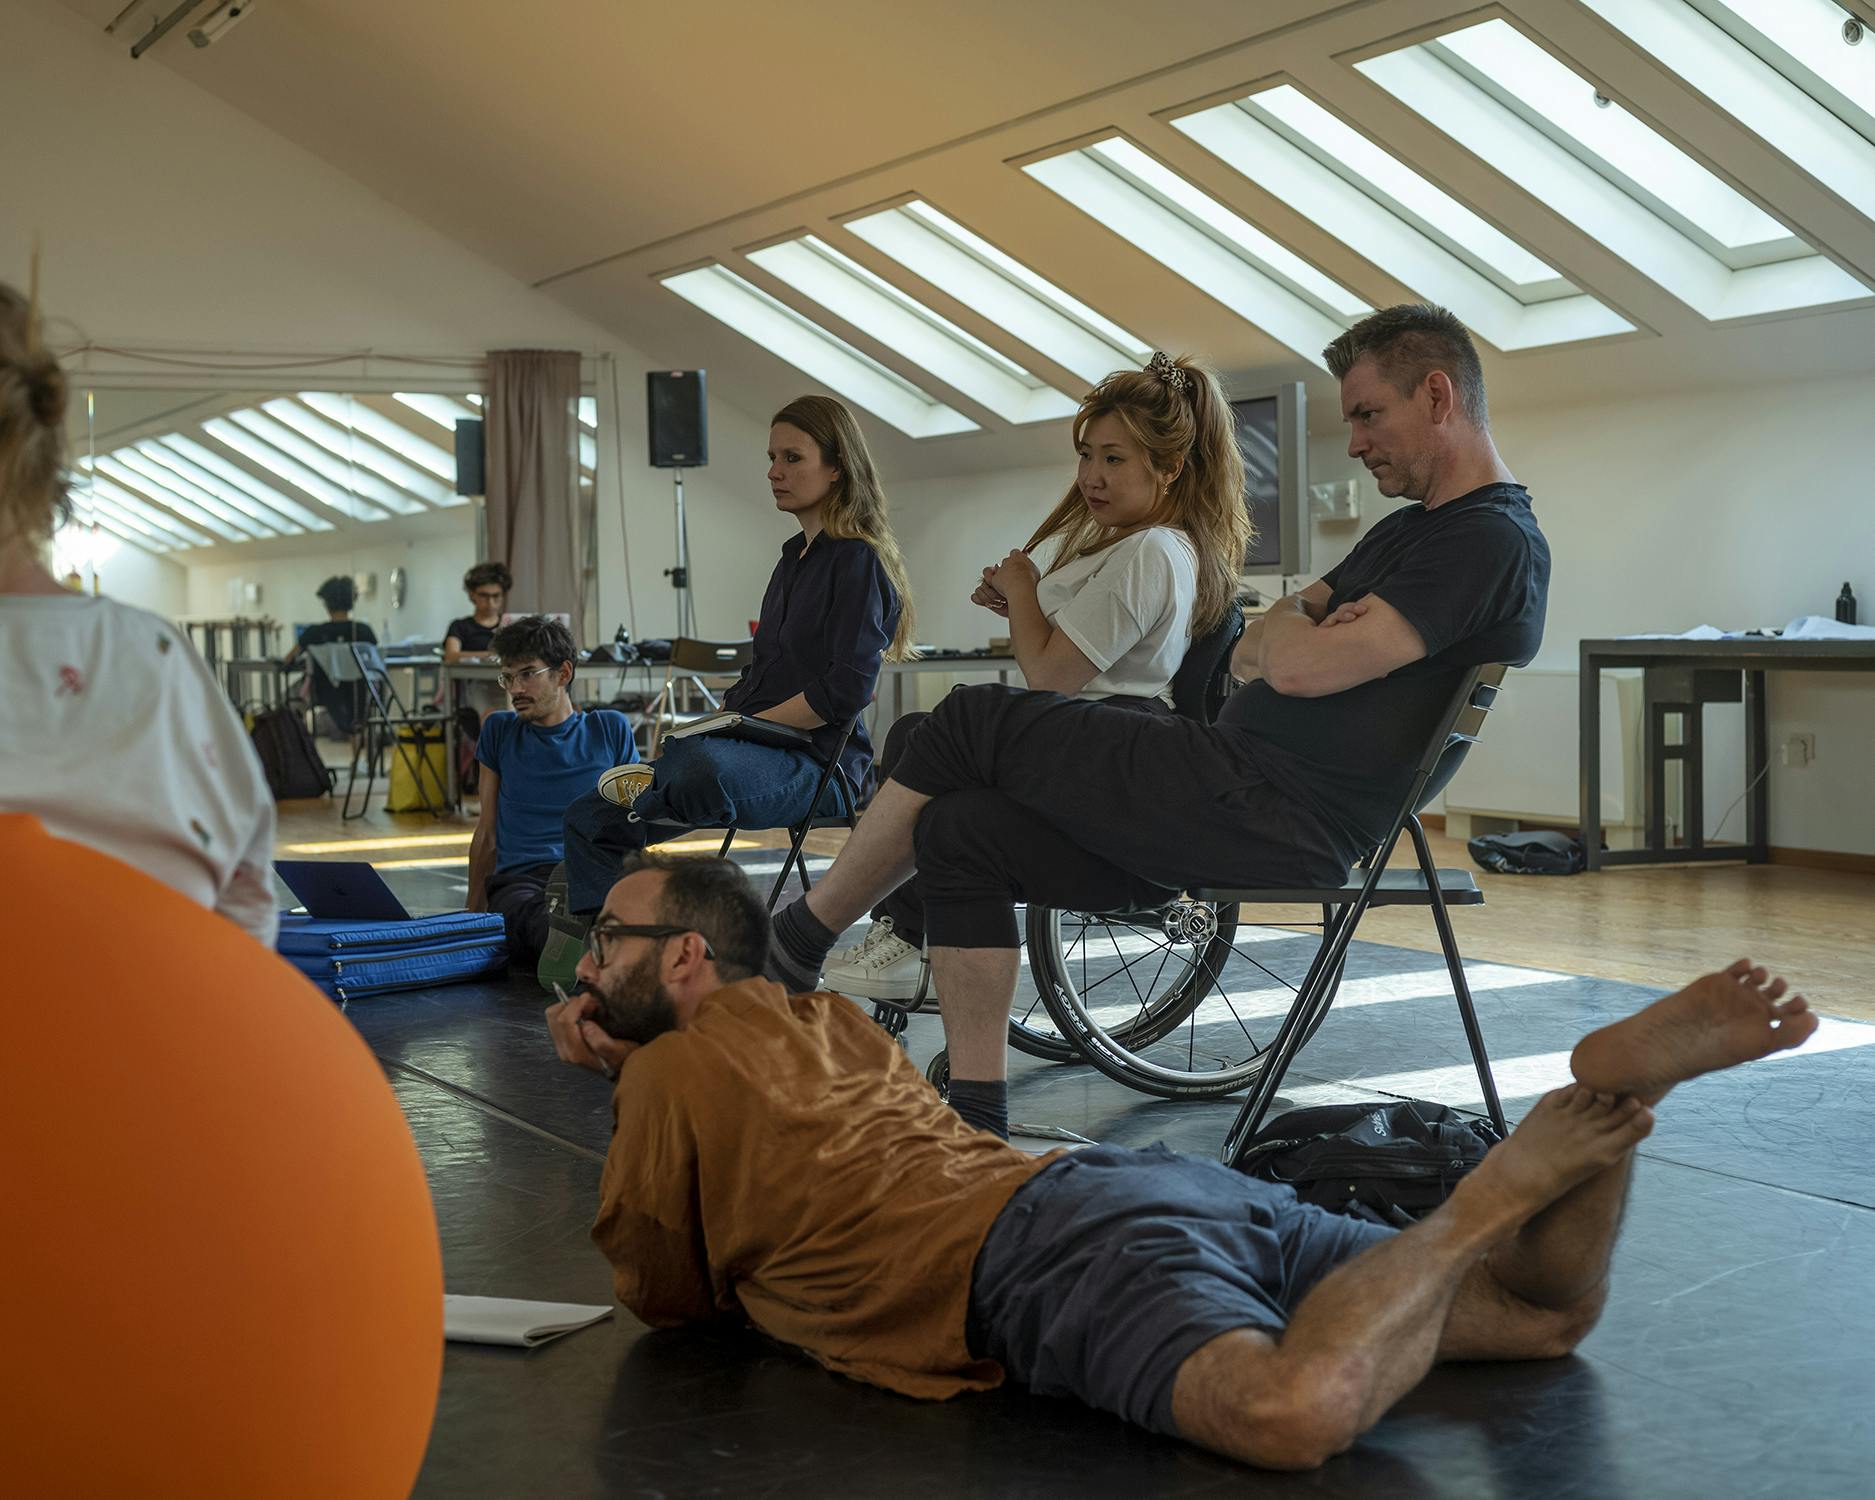 A few EBA workshop participants during a discussion. They are partly lying down, partly sitting in wheelchairs or pouffes depending on different personal needs.